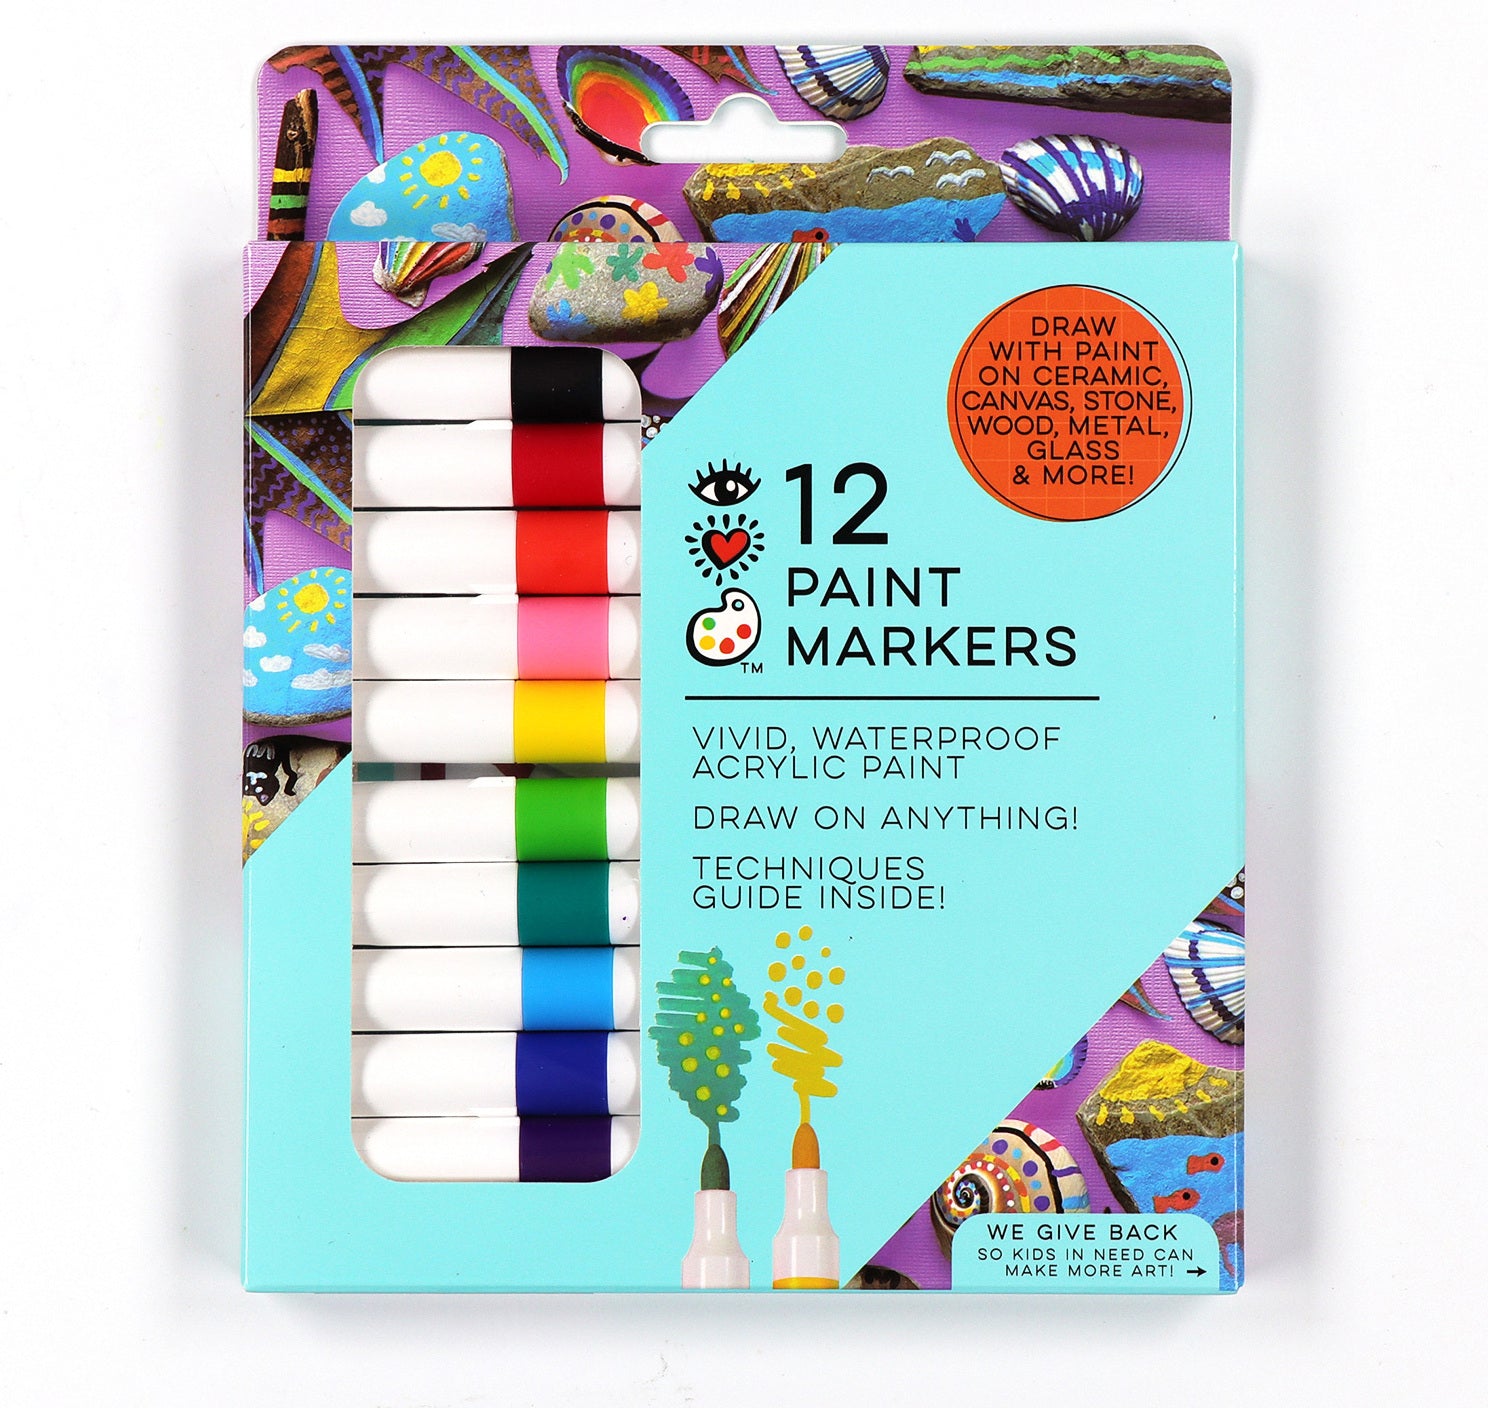 Acrylic Paint Markers – Turner Toys